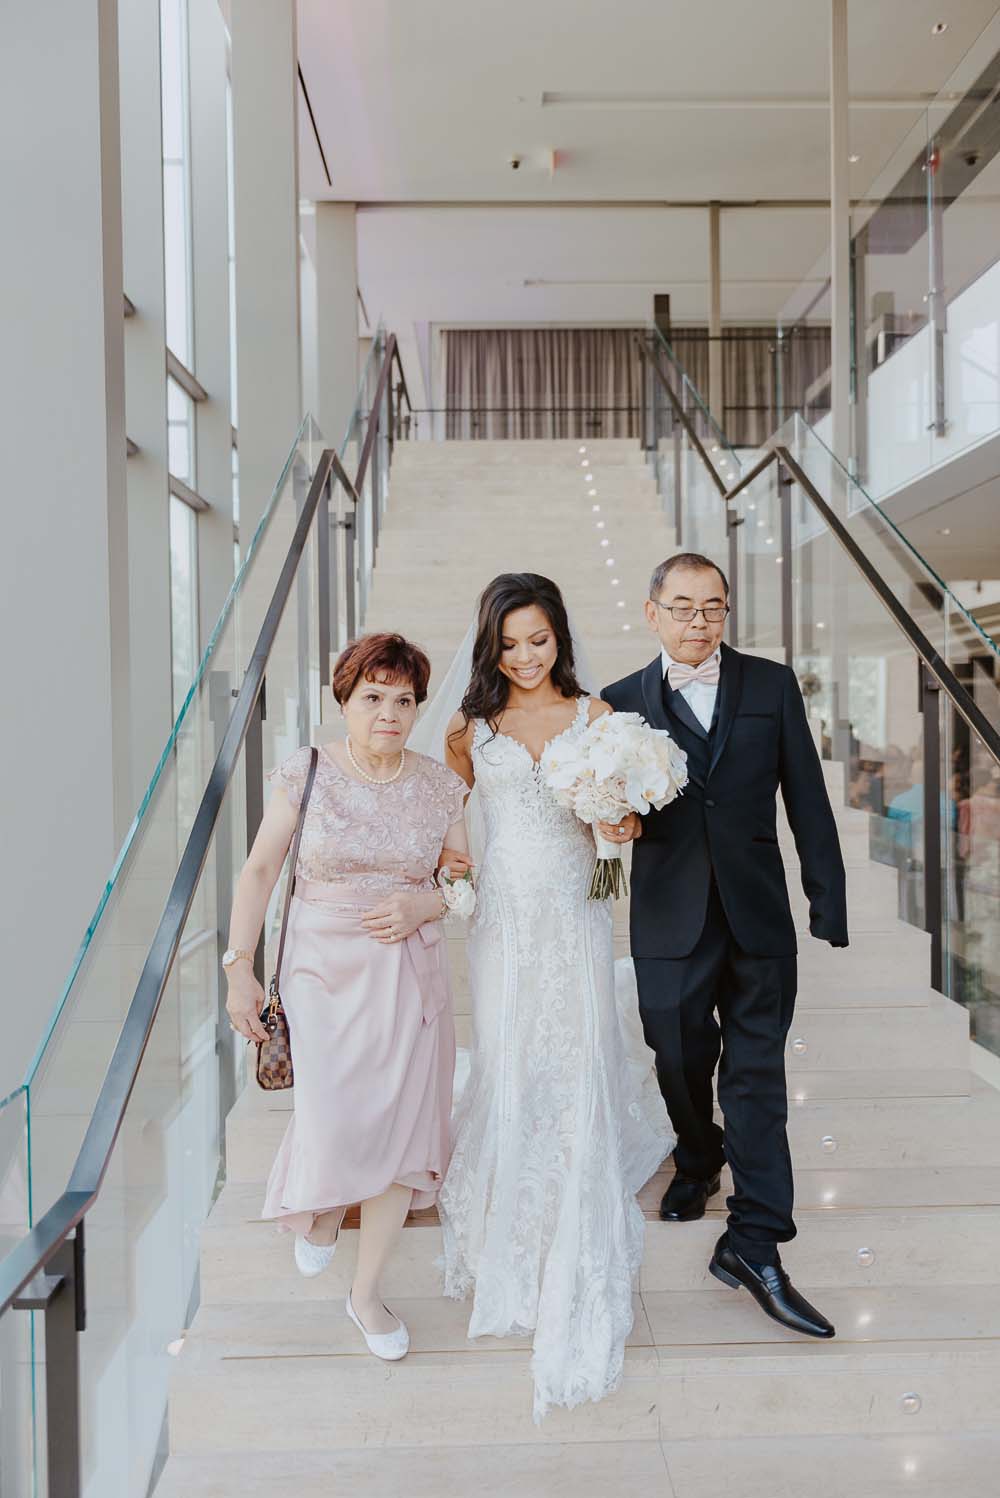 An Opulent Wedding At The Royal Conservatory Of Music - bride